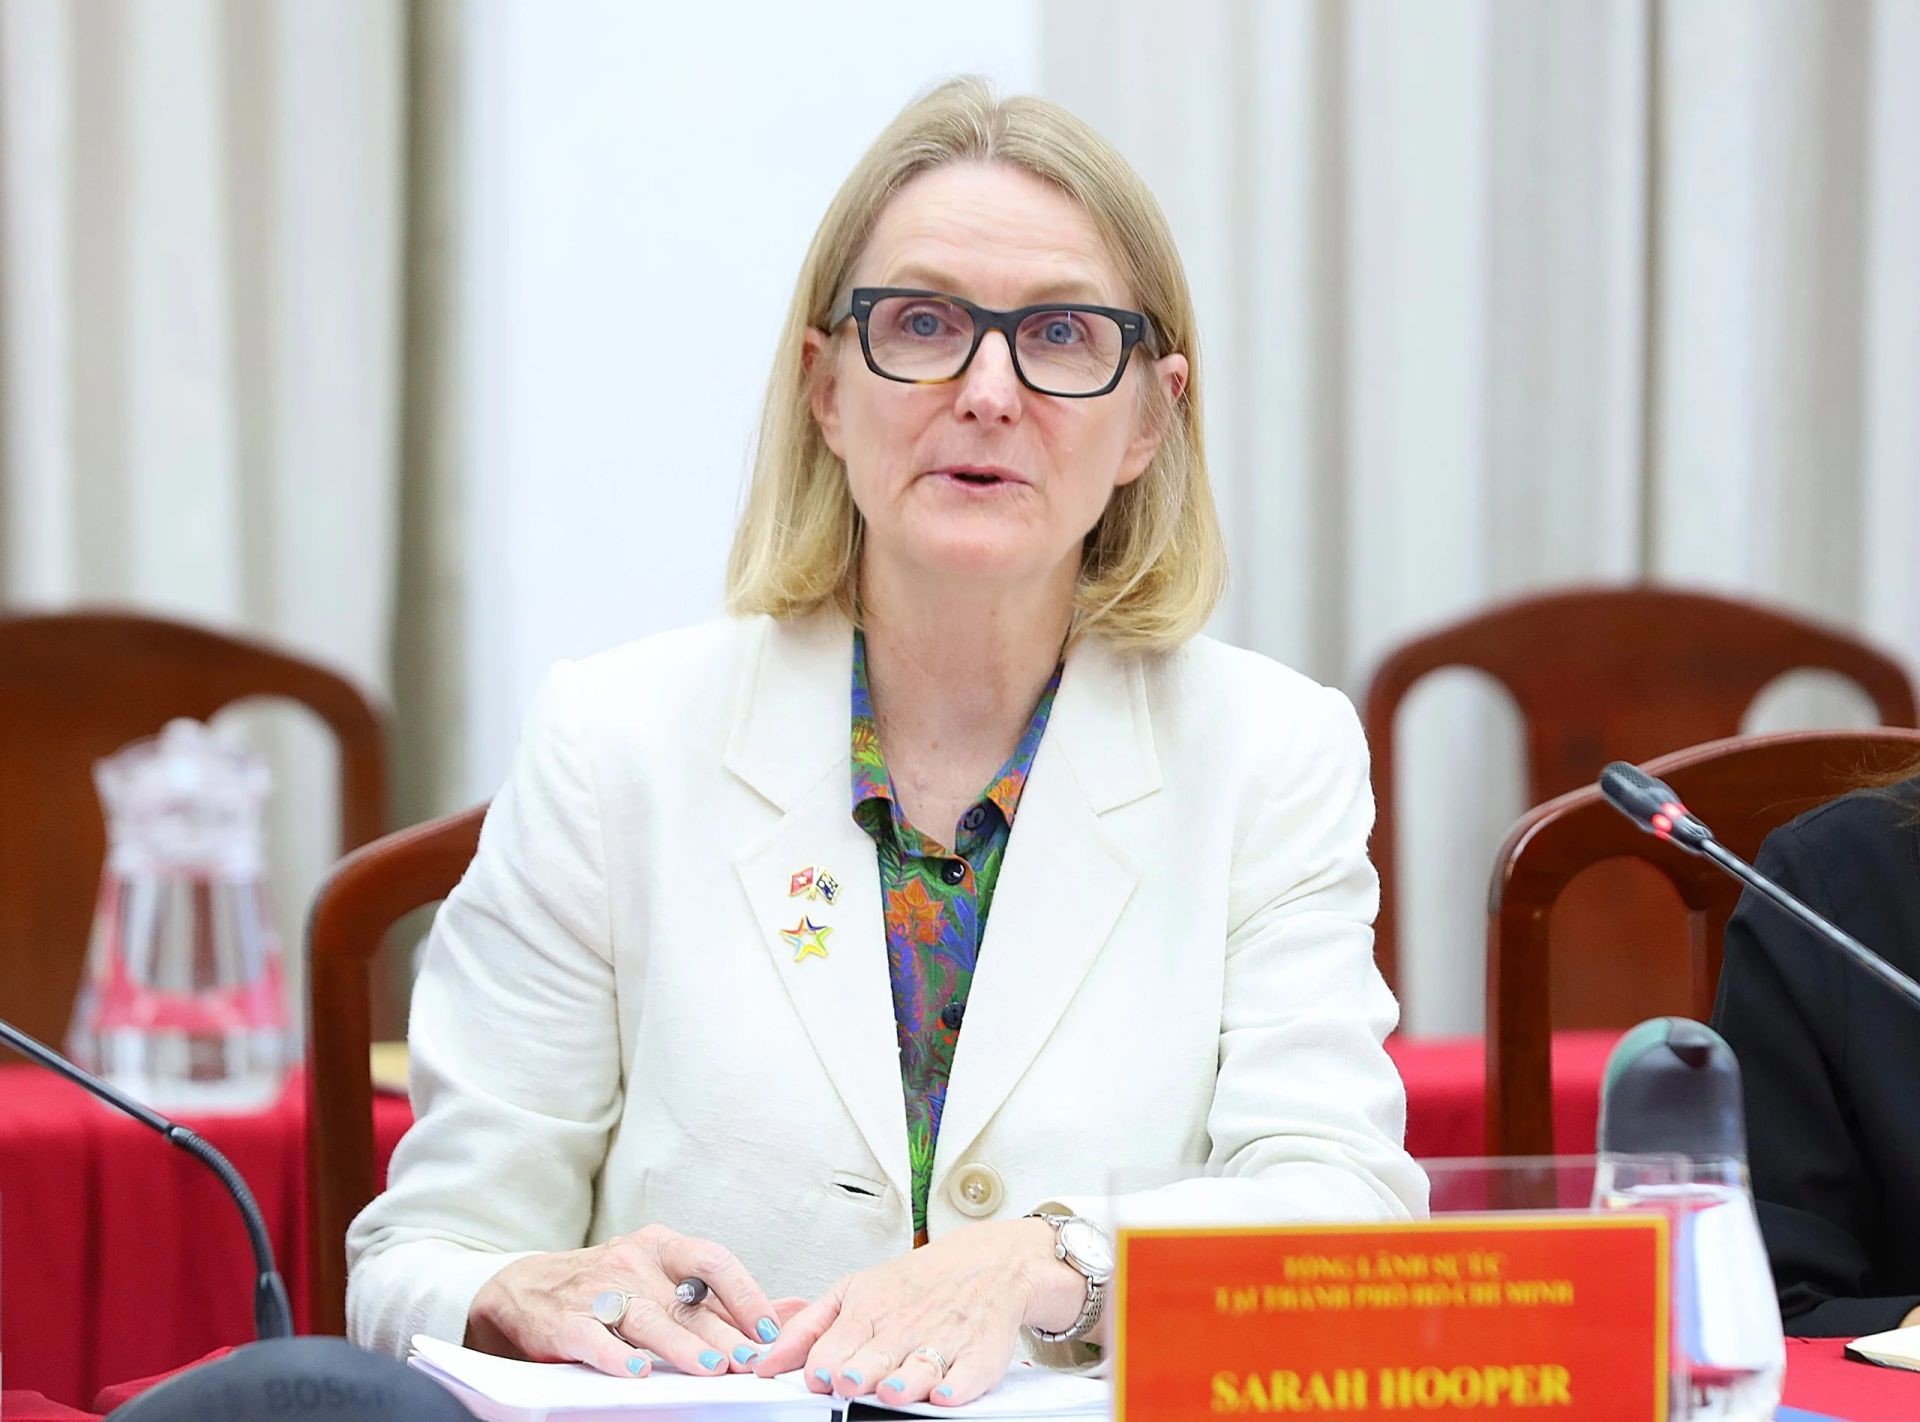 Ms Sarah Hopper - Australian Consul General in City. Ho Chi Minh spoke at the working session.